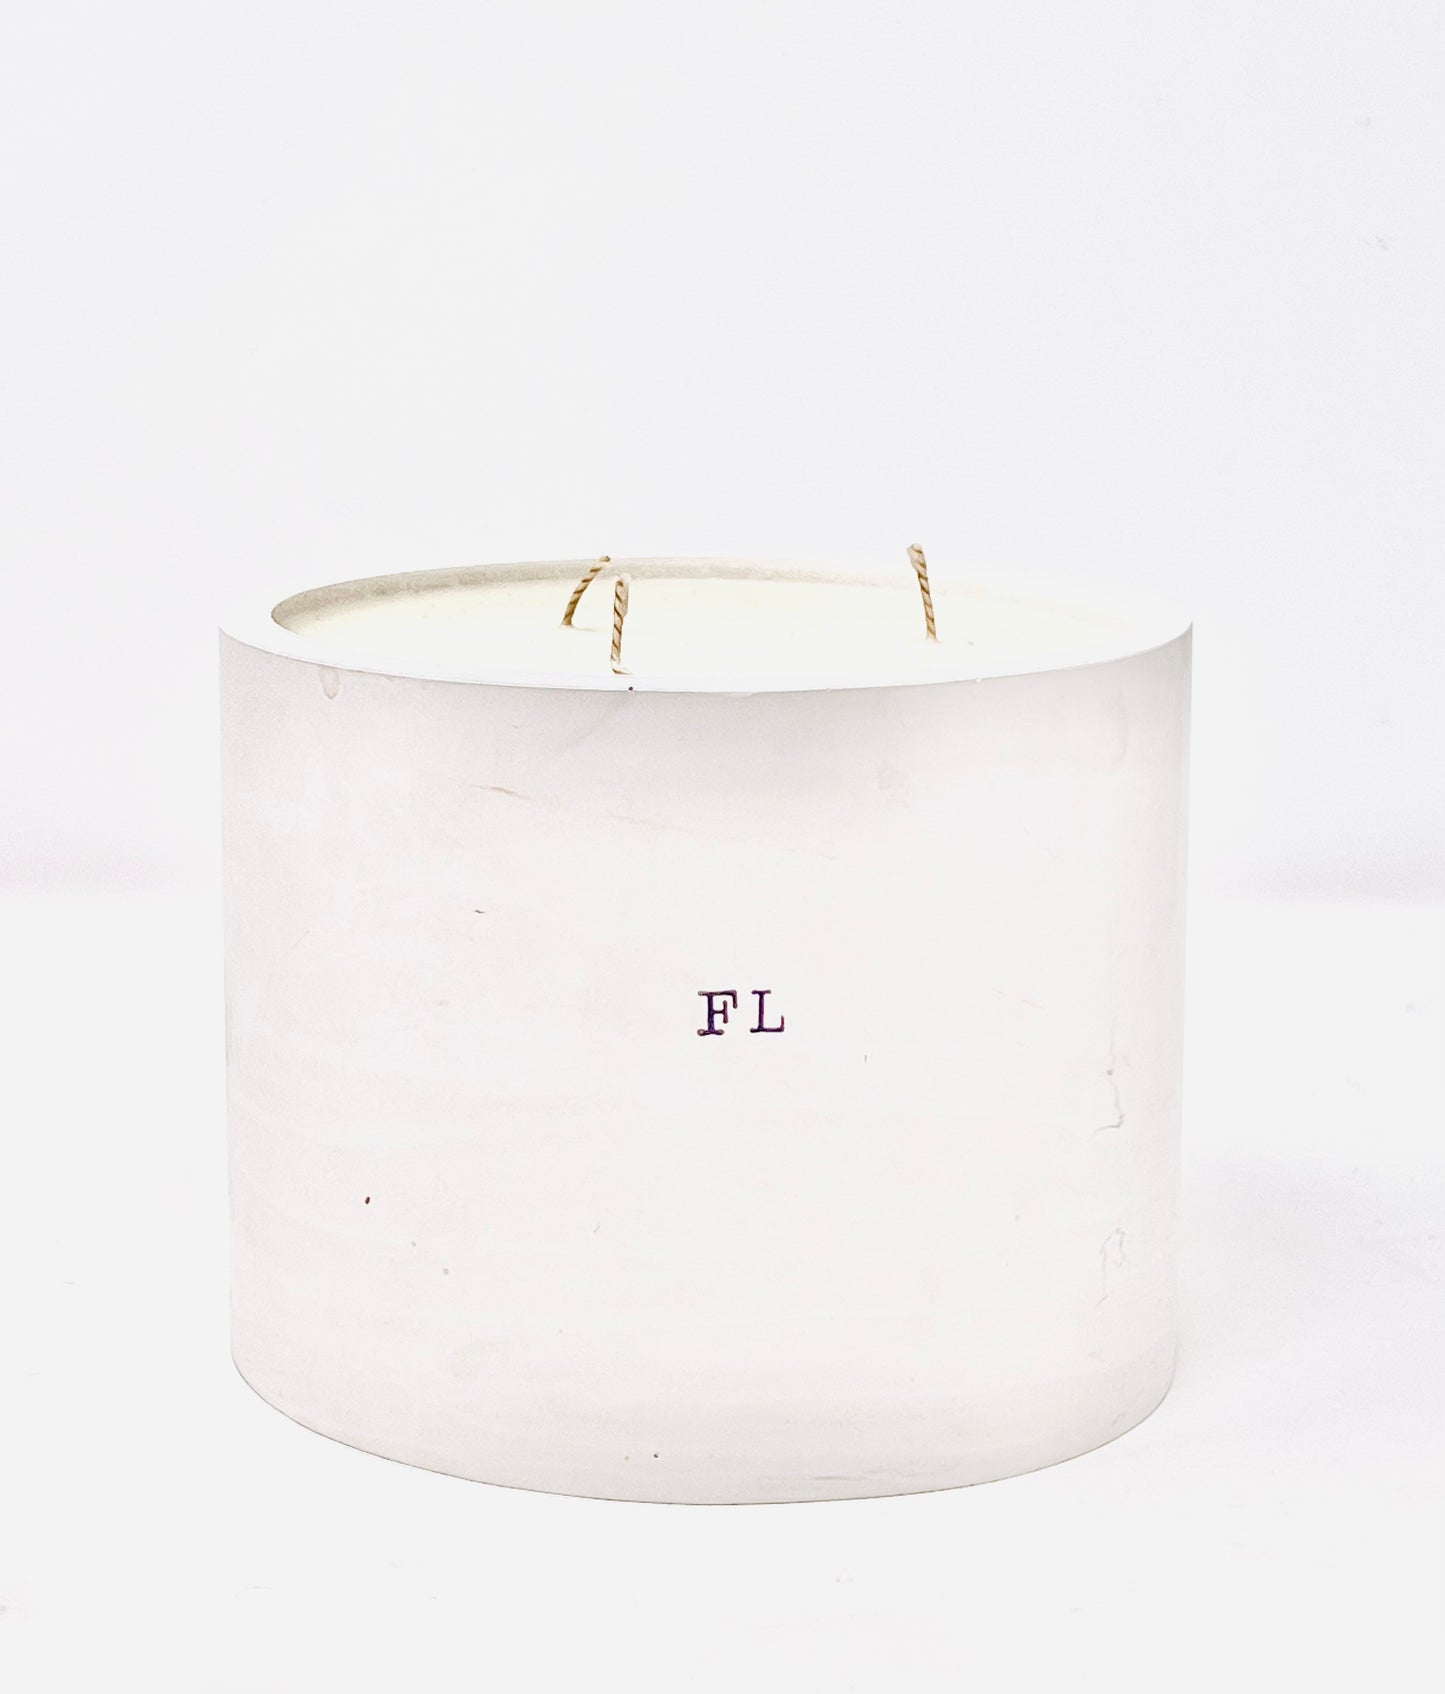 Crown Chakra Soy Candle, Slow Burn Candle